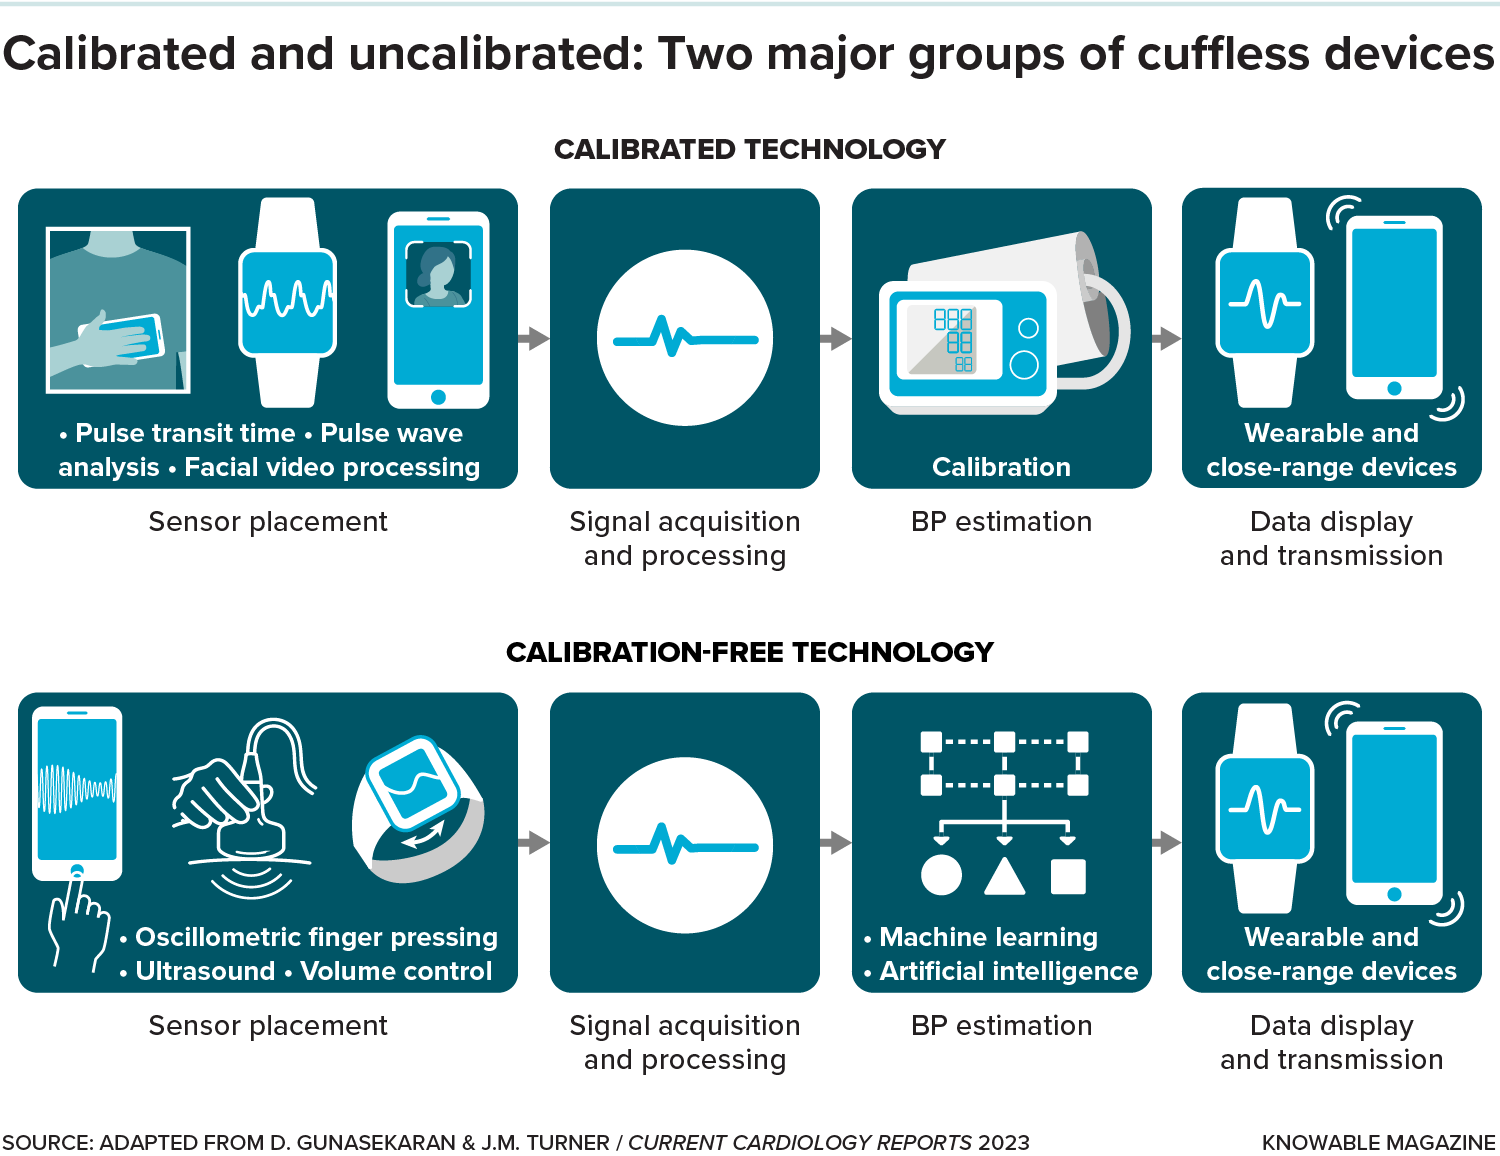 Infographic describing two broad categories into which the new cuffless blood pressure measurement devices can be grouped: those that require calibration and those that do not.